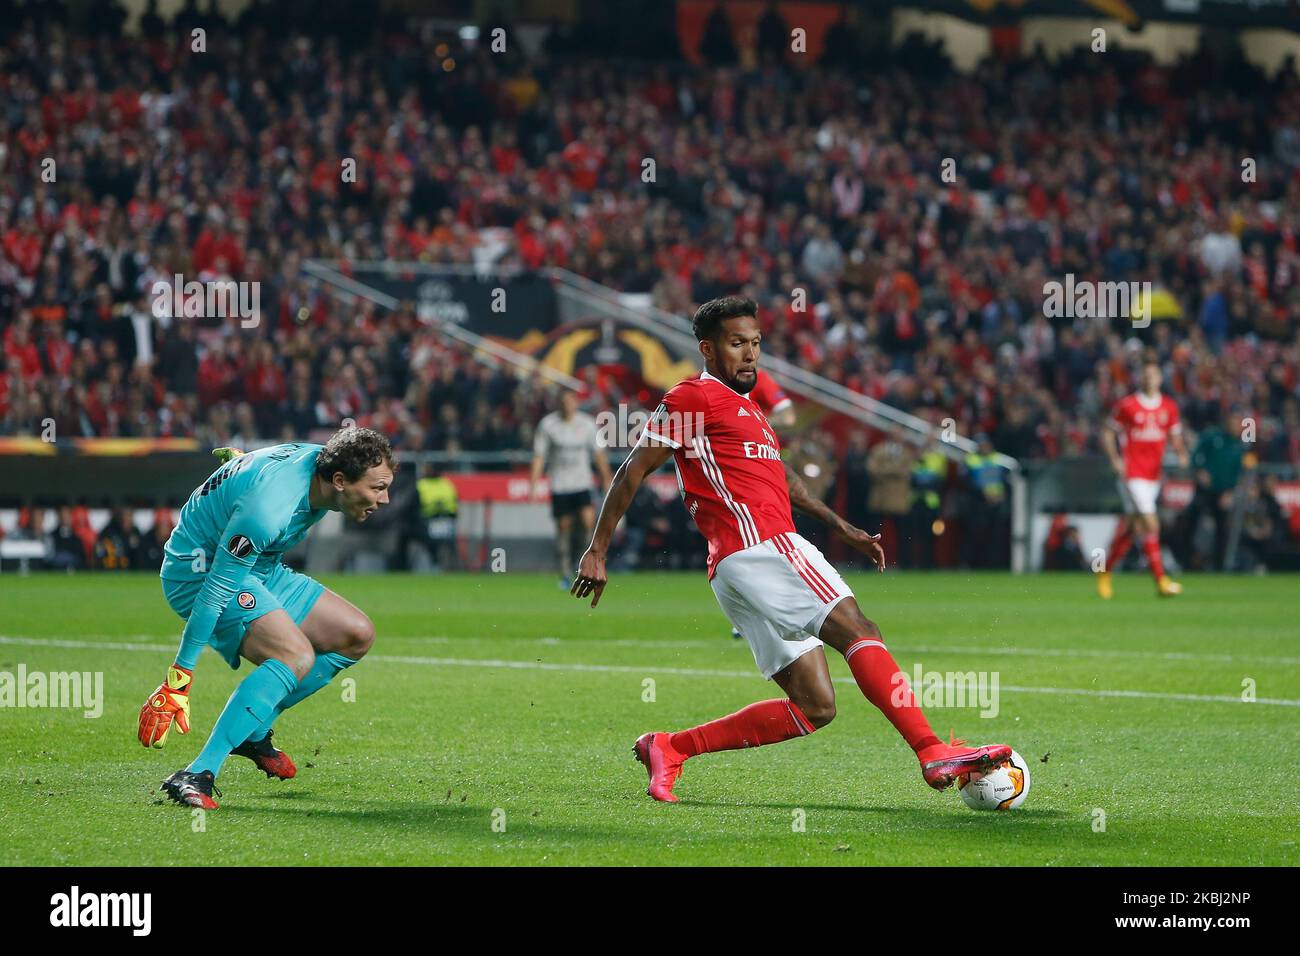 SL Benfica Forward Dyego Sousa in action during the UEFA Europa League round of 32 2nd leg football match between SL Benfica and FC Shakhtar Donetsk at the Estadio da Luz in Lisbon on February 27, 2020. (Photo by Valter Gouveia/NurPhoto) Stock Photo